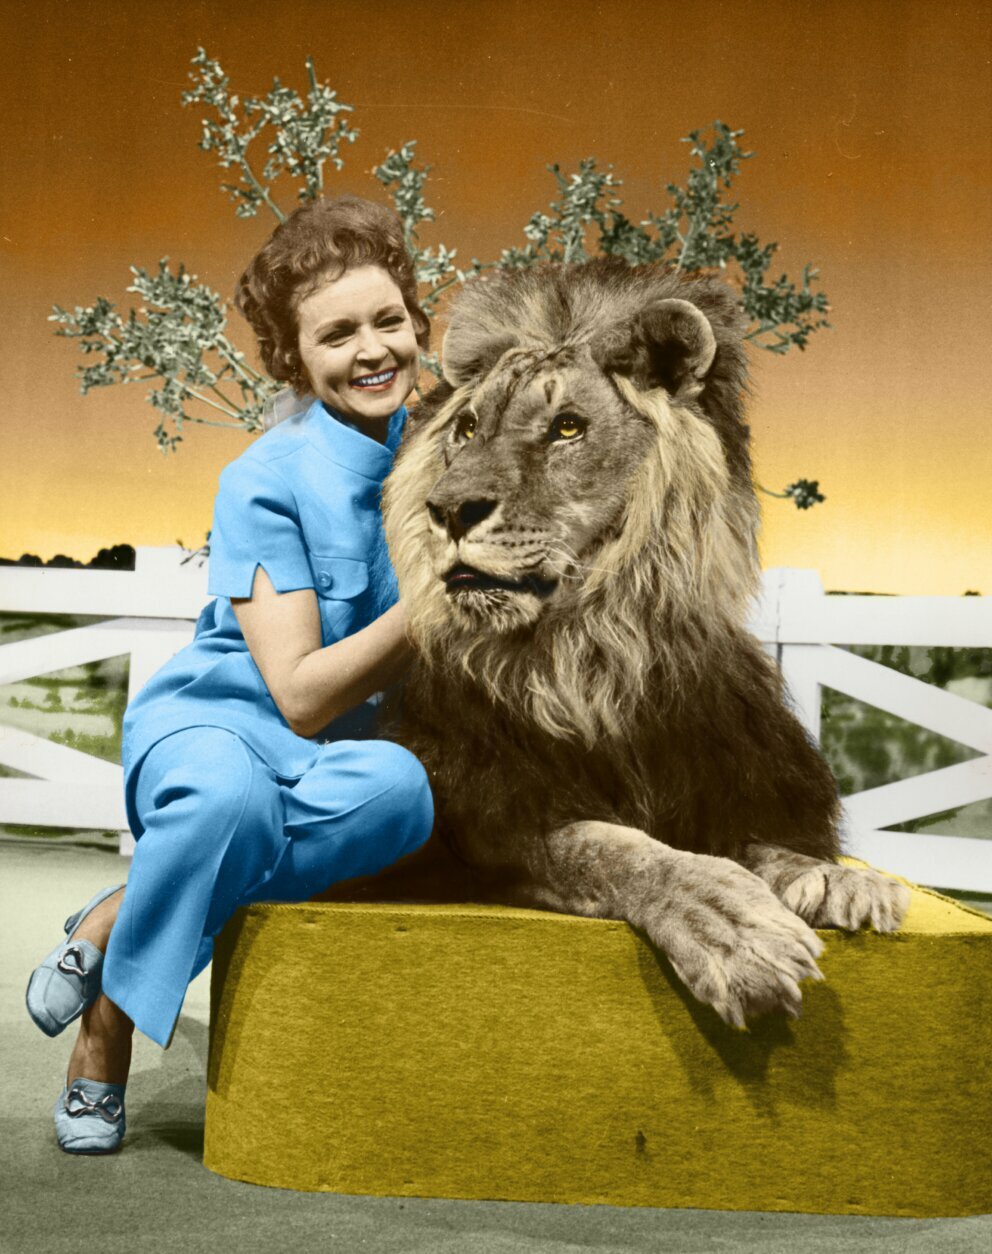 <p>This colorized image released by Margate And Chandler, Inc. shows actress and animal activist Betty White with a lion from her 1970s series “The Pet Set.&#8221; The restored 39-episode series, renamed &#8220;Betty White’s Pet Set,” features celebrity guests Mary Tyler Moore, Carol Burnett, Burt Reynolds, James Brolin and Della Reese. (Margate And Chandler, Inc. via AP)</p>
